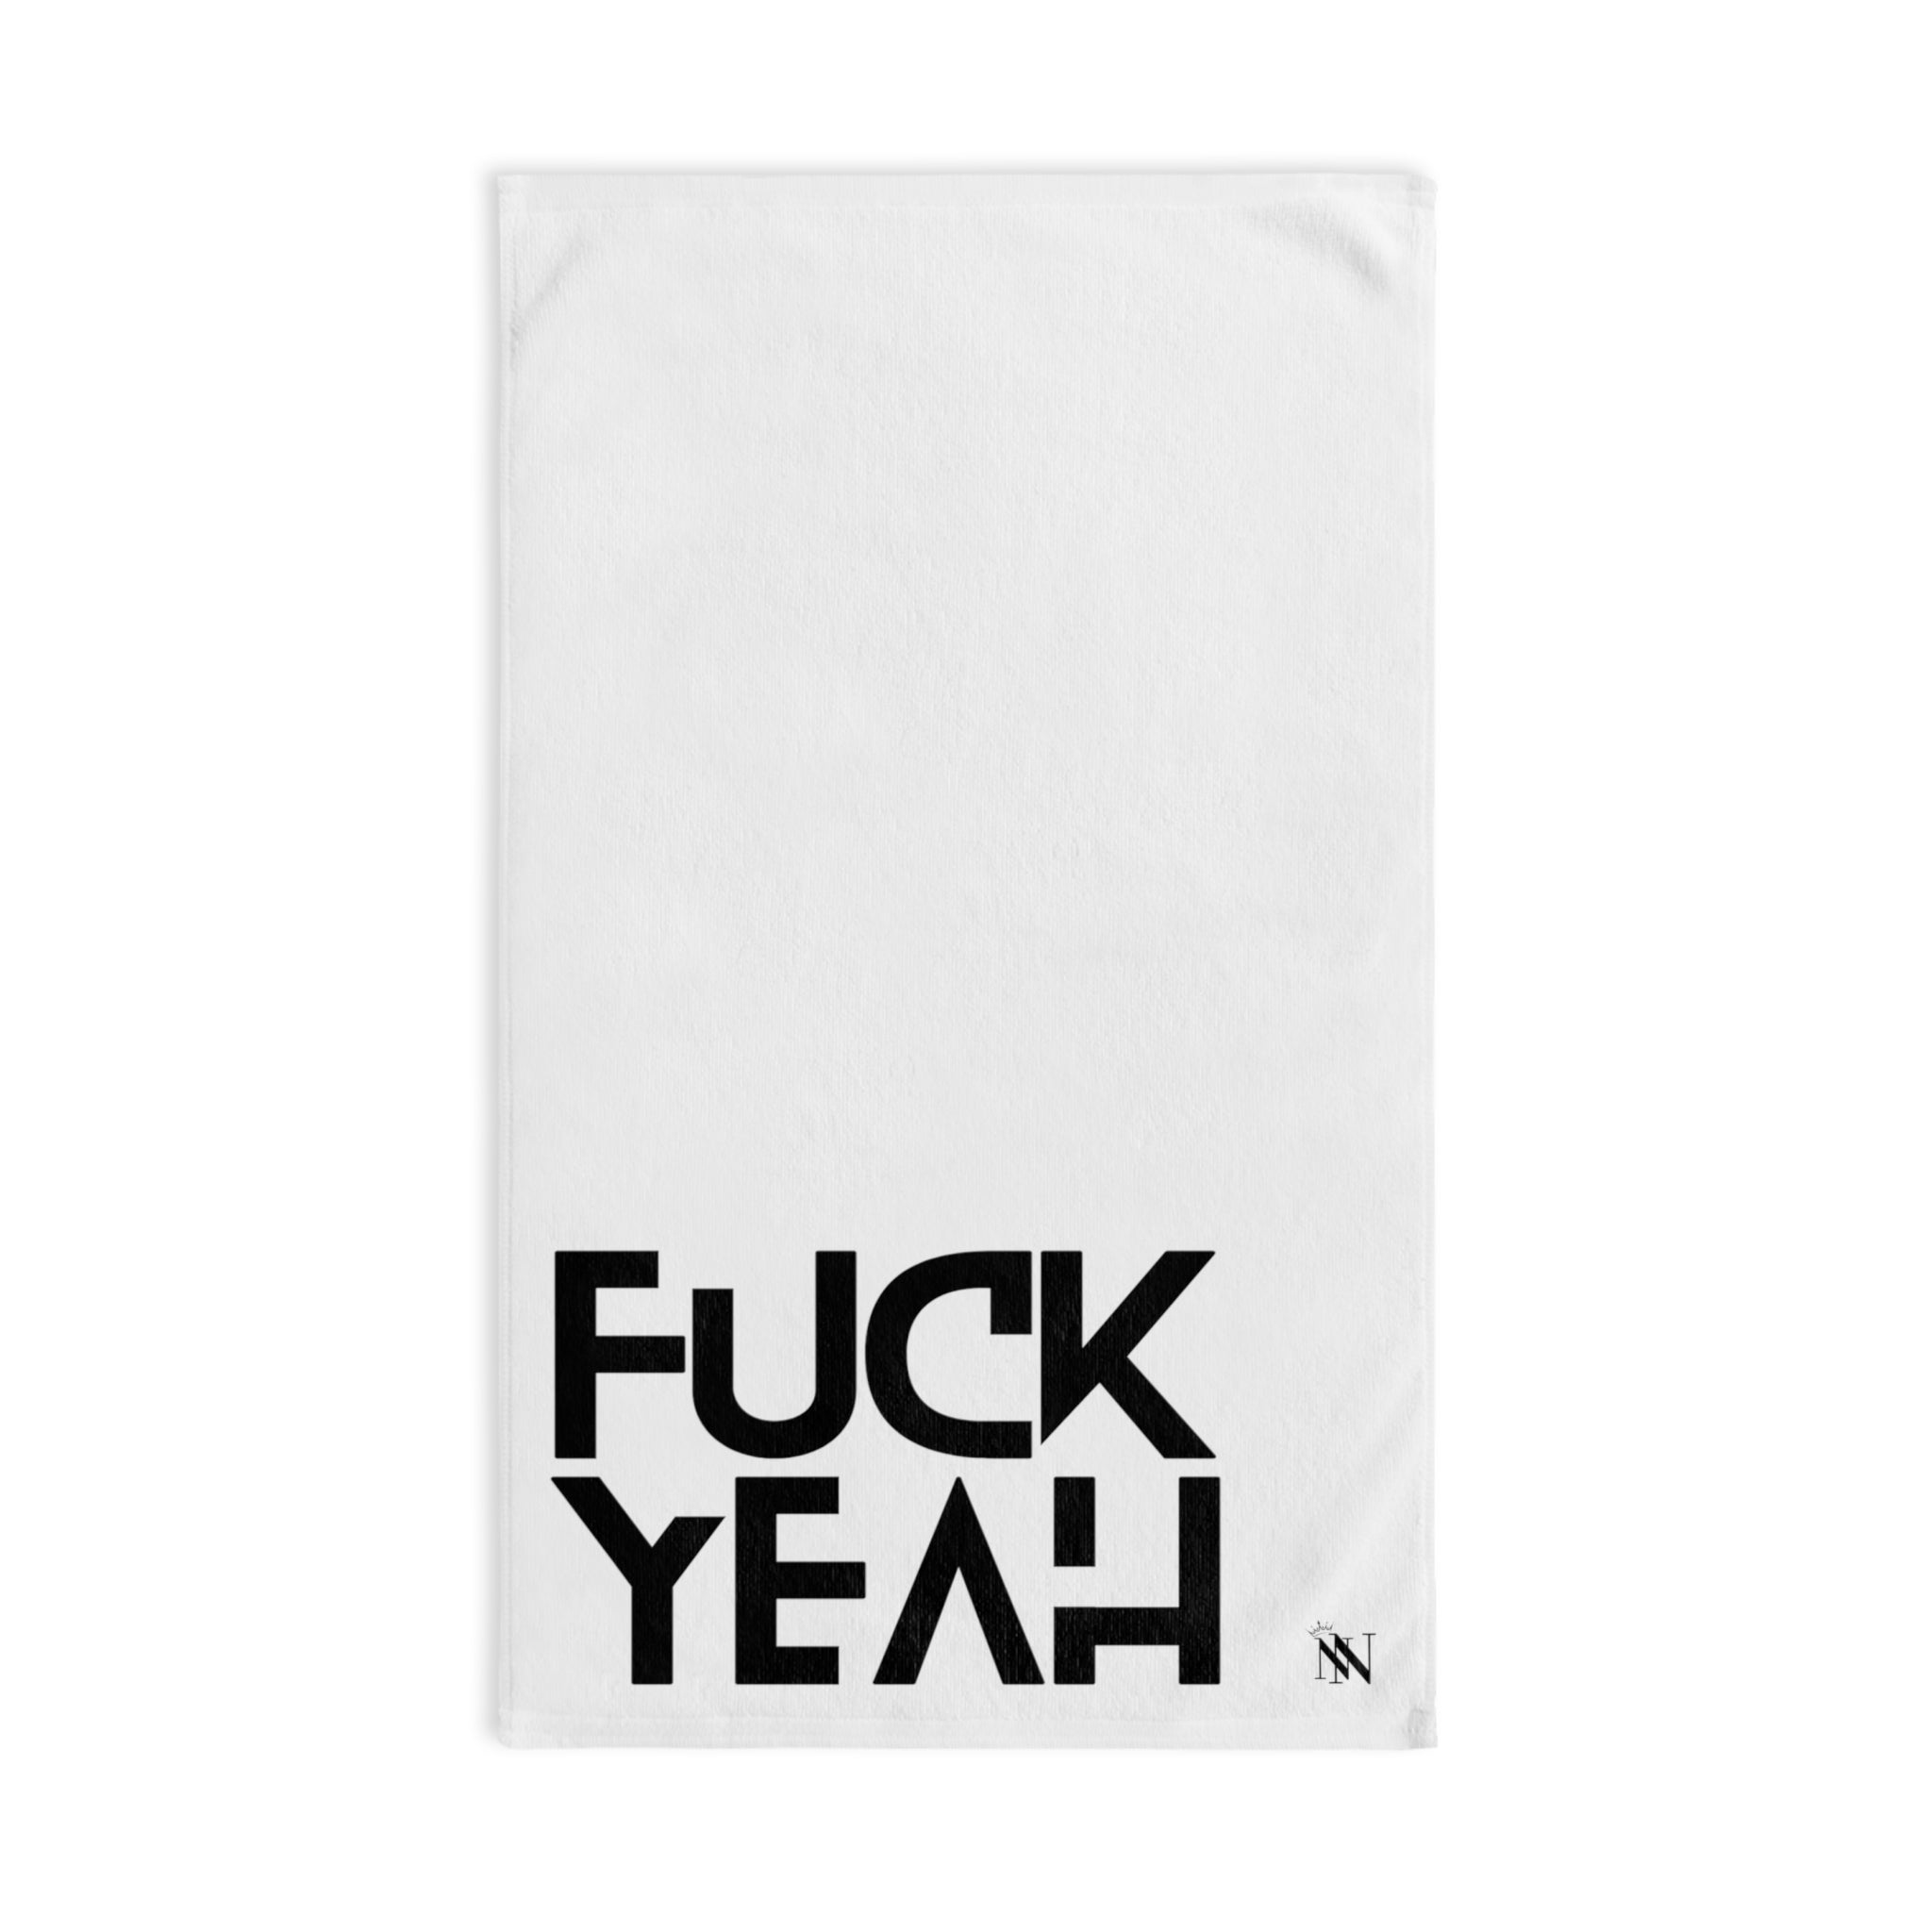 Yeah F*ck YesWhite | Funny Gifts for Men - Gifts for Him - Birthday Gifts for Men, Him, Her, Husband, Boyfriend, Girlfriend, New Couple Gifts, Fathers & Valentines Day Gifts, Christmas Gifts NECTAR NAPKINS